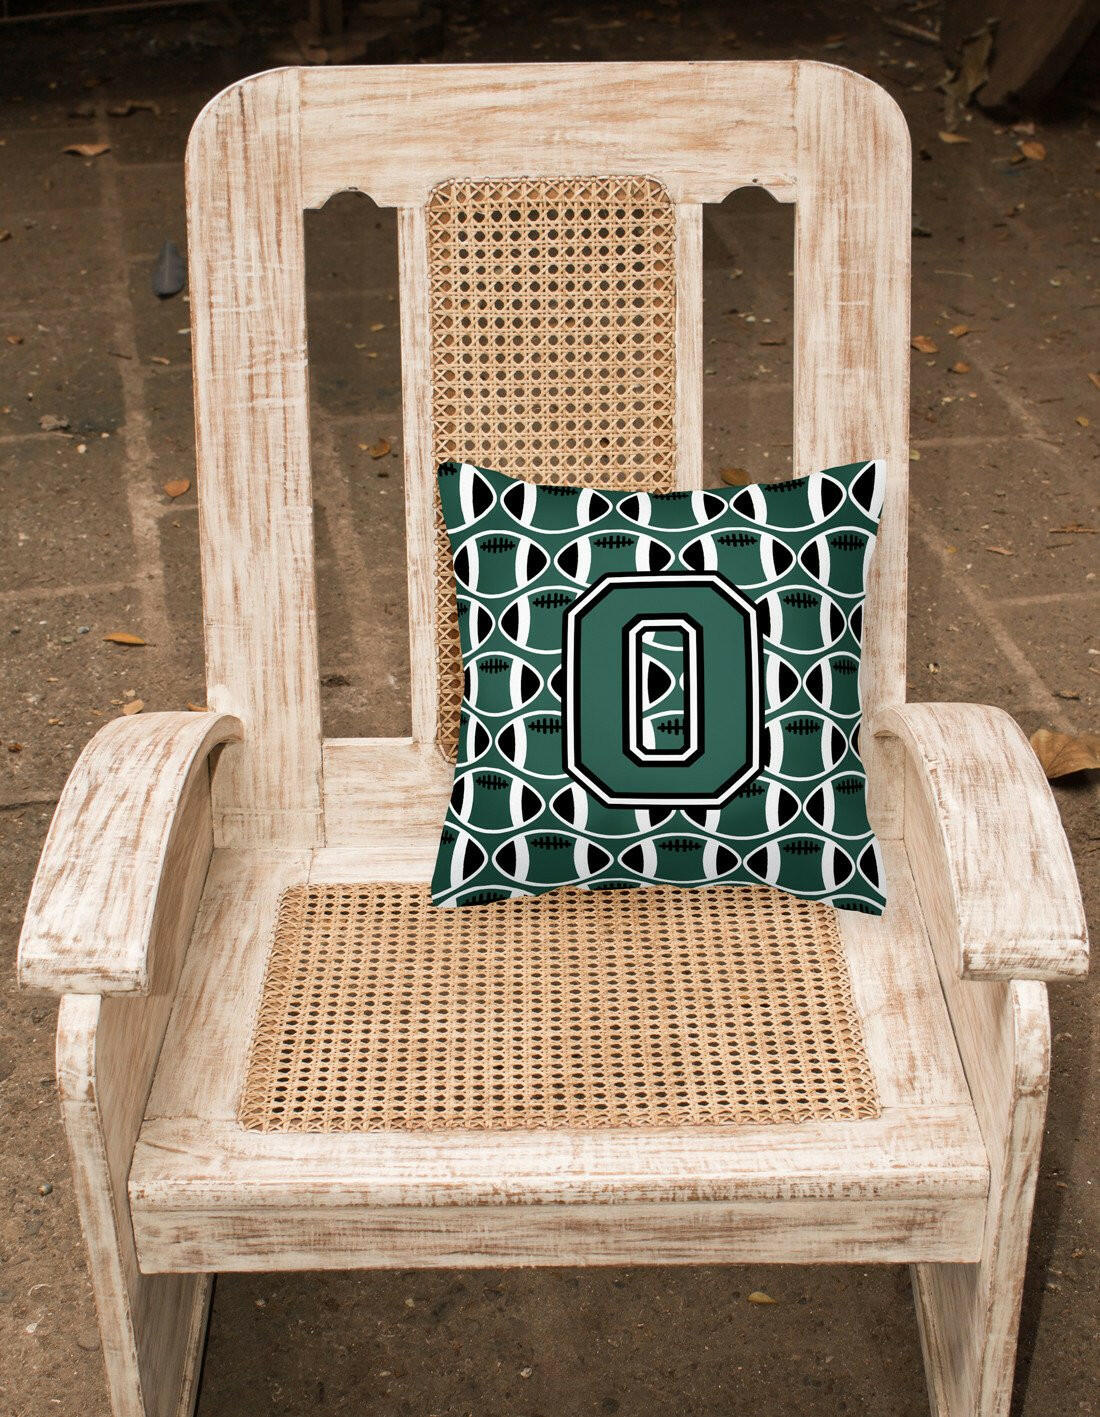 Letter O Football Green and White Fabric Decorative Pillow CJ1071-OPW1414 by Caroline's Treasures